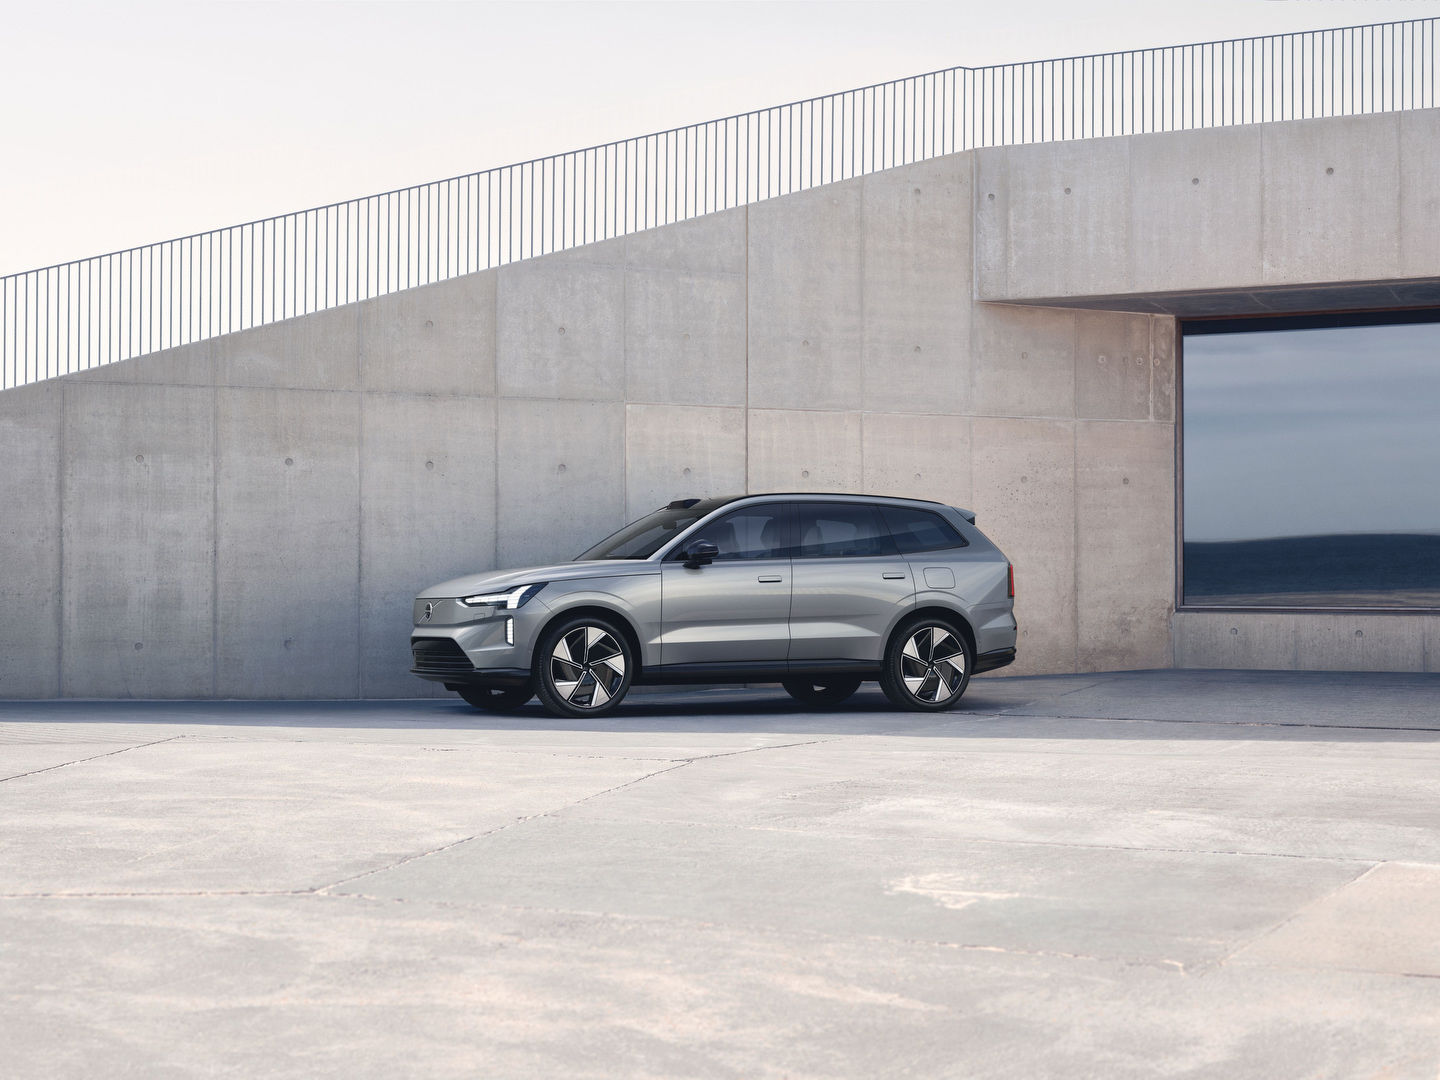 What are the main differences between the Volvo EX90 and XC90?